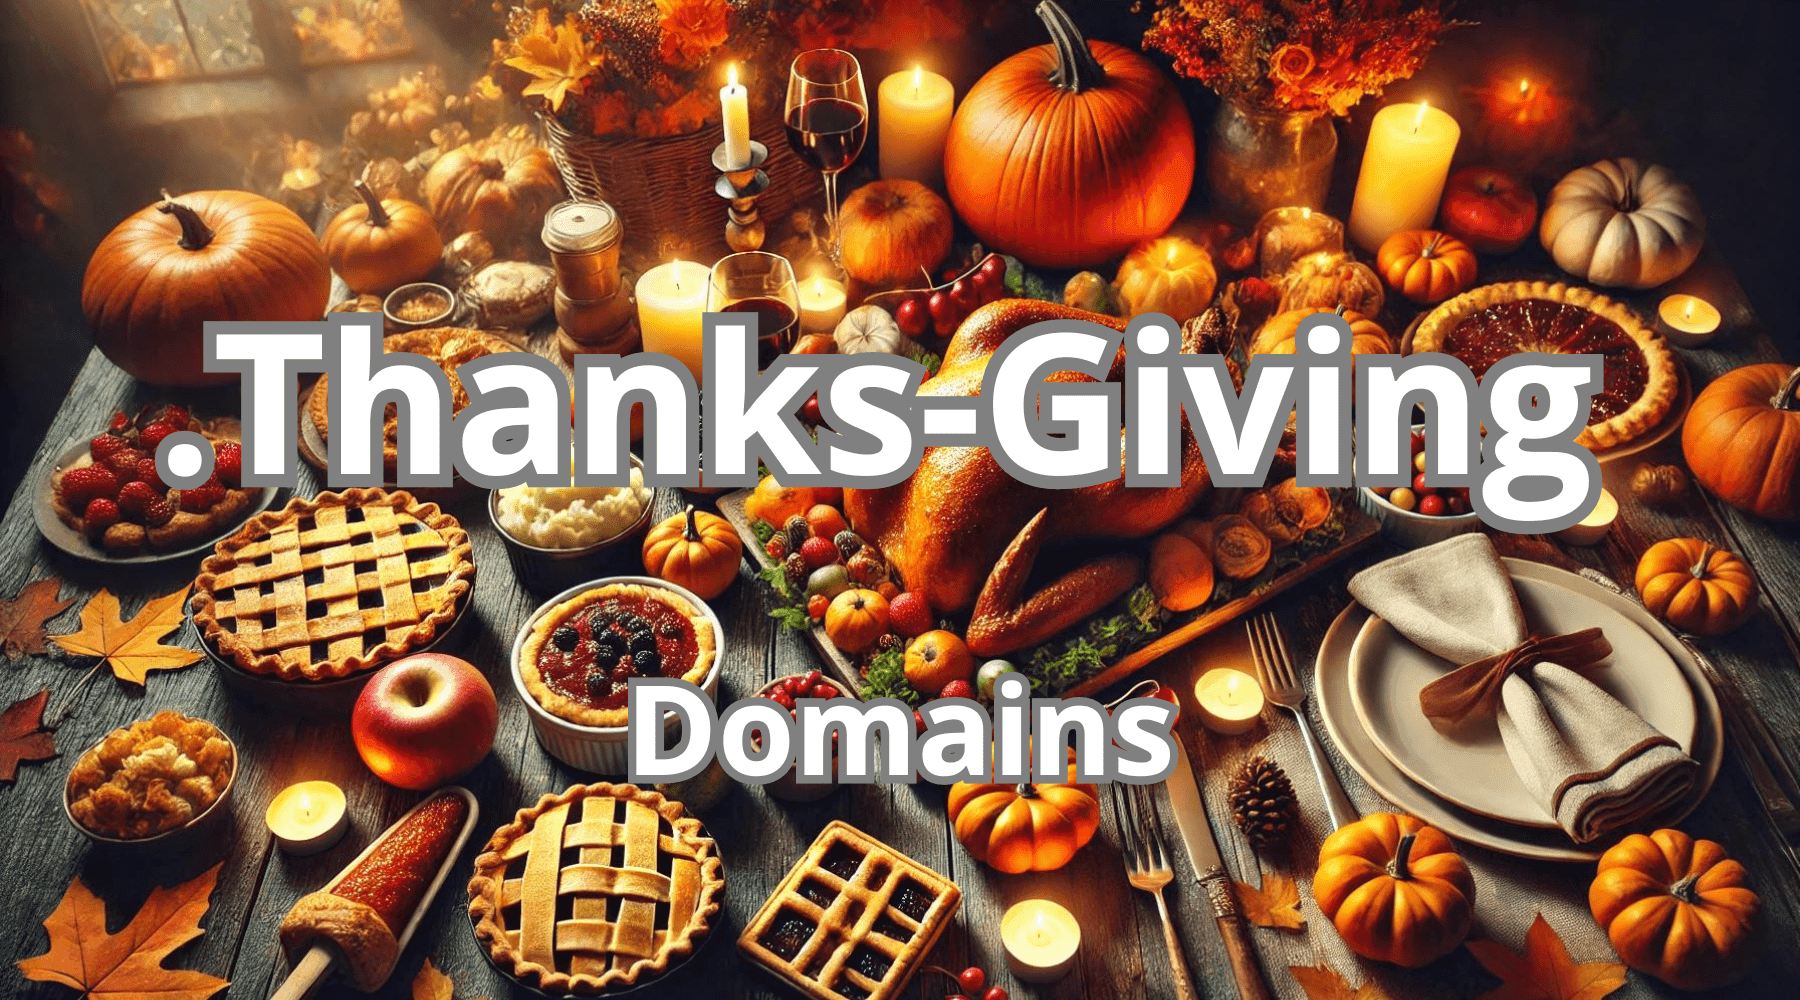 thanks-giving background image